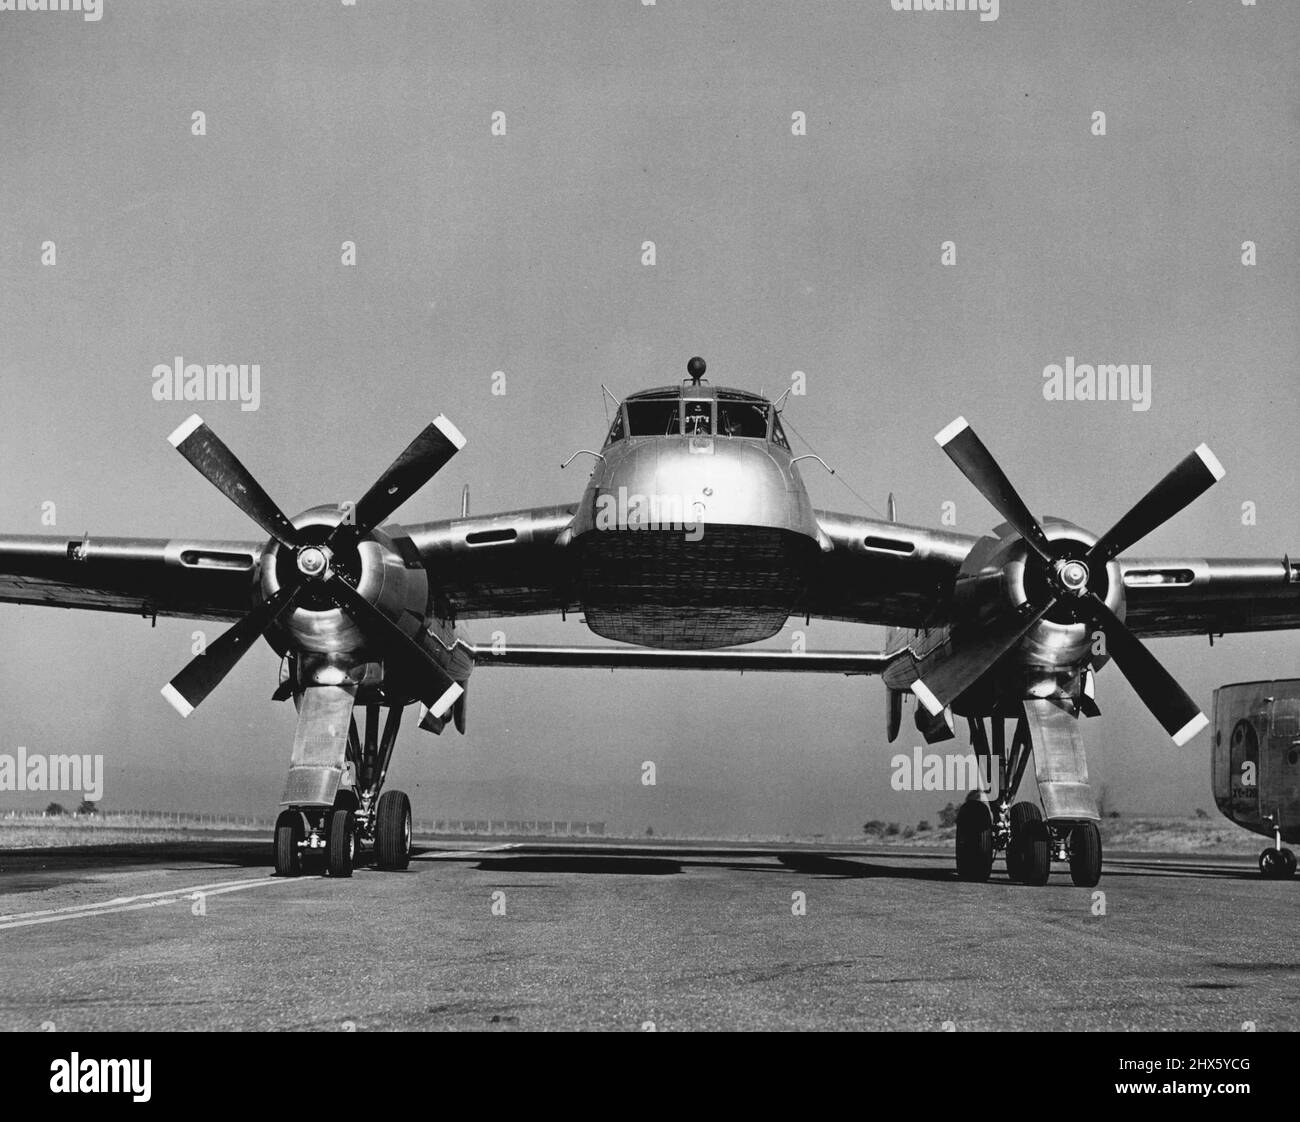 Minus its cargo-carrying detachable fuselage, the new Fairchild XC-120 Packplane taxis easily on its specially-designed quad- ricycle landing gear. The cargo compartment fits beneath the plane, held in place by four centrally-placed connections. October 01, 1950. (Photo by Dan Frankforter, Fairchild Aircraft).;Minus its cargo-carrying detachable fuselage, the new Fairchild XC-120 Packplane taxis easily on its specially-designed quad- ricycle landing gear. The cargo compartment fits beneath the p Stock Photo